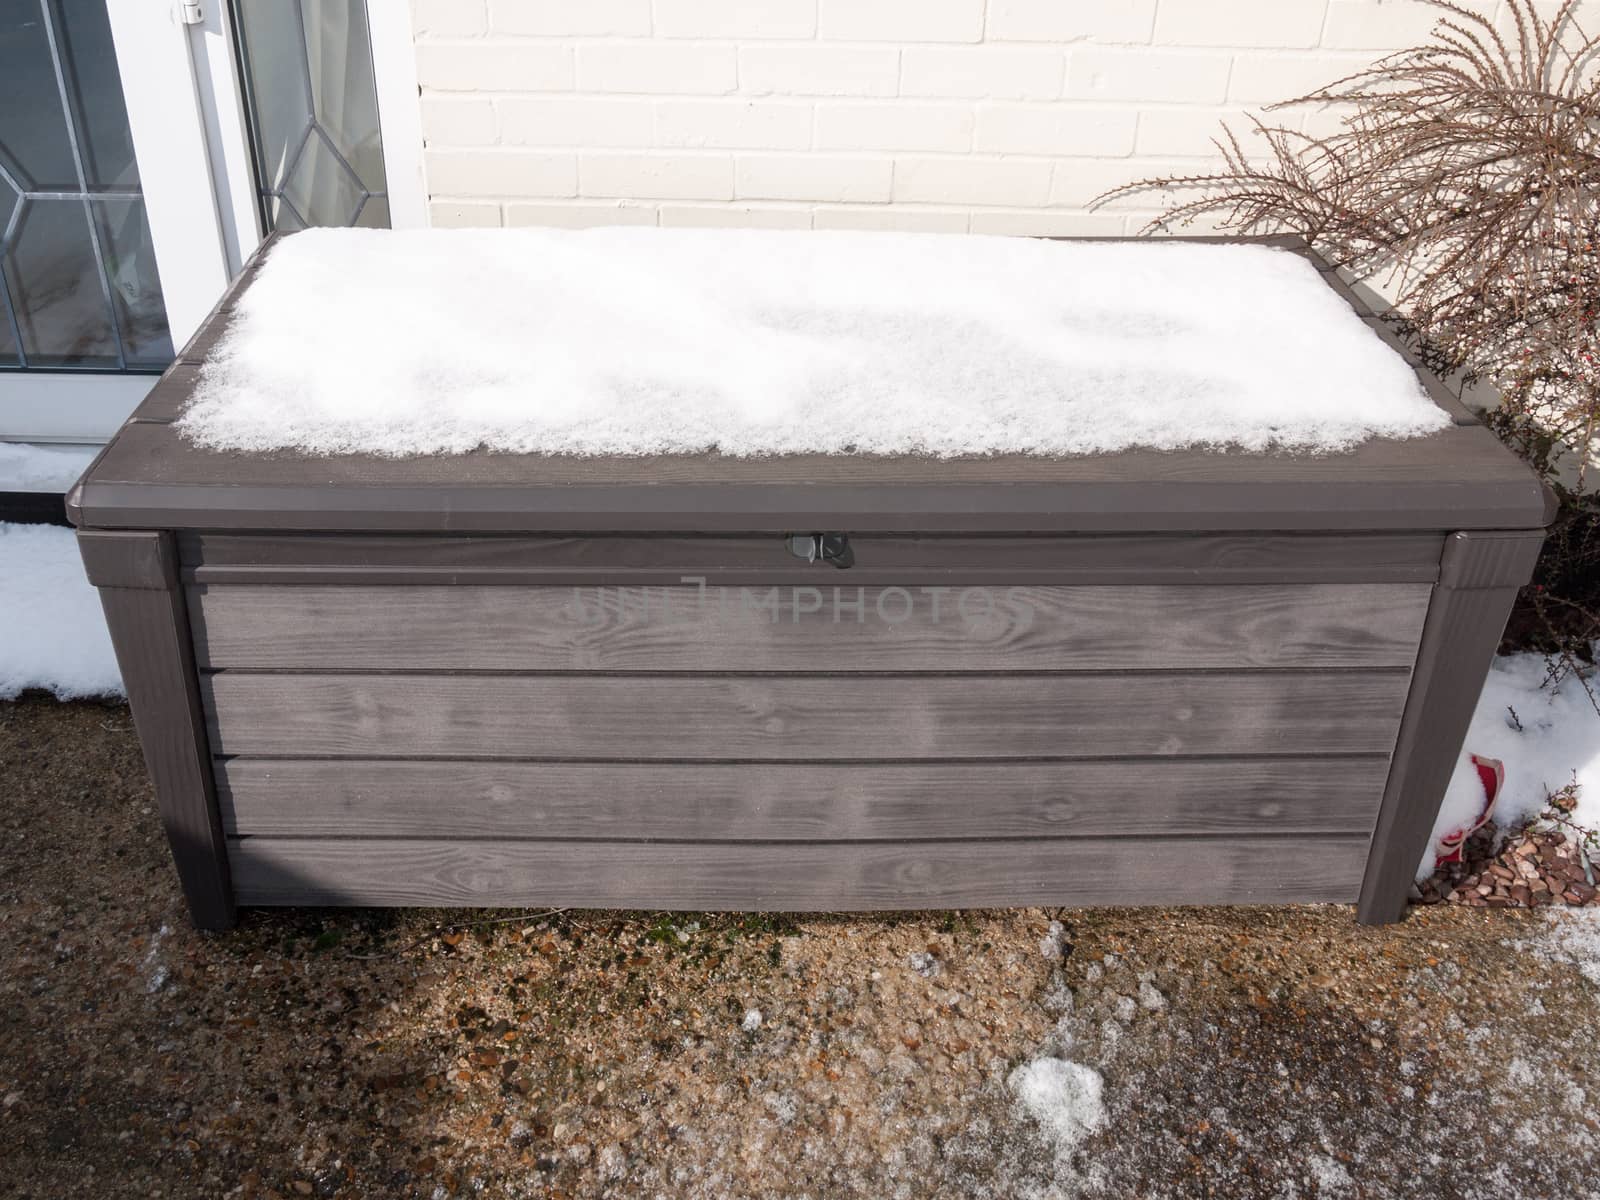 snow on top of plastic container outside in garden closed locked; essex; england; uk